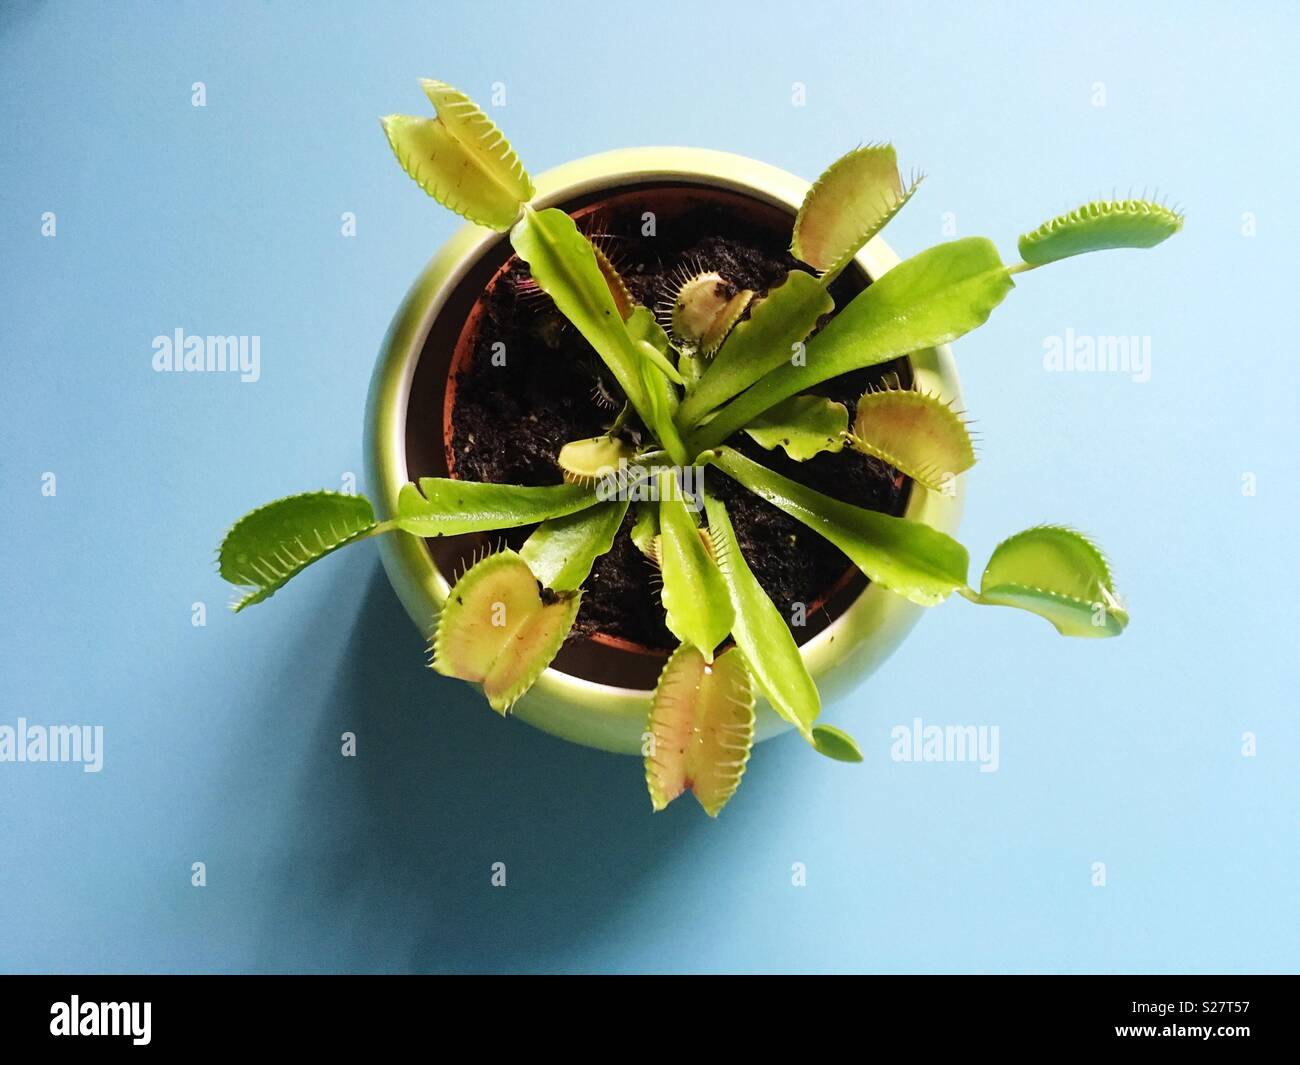 Dionaea muscipula from above Stock Photo